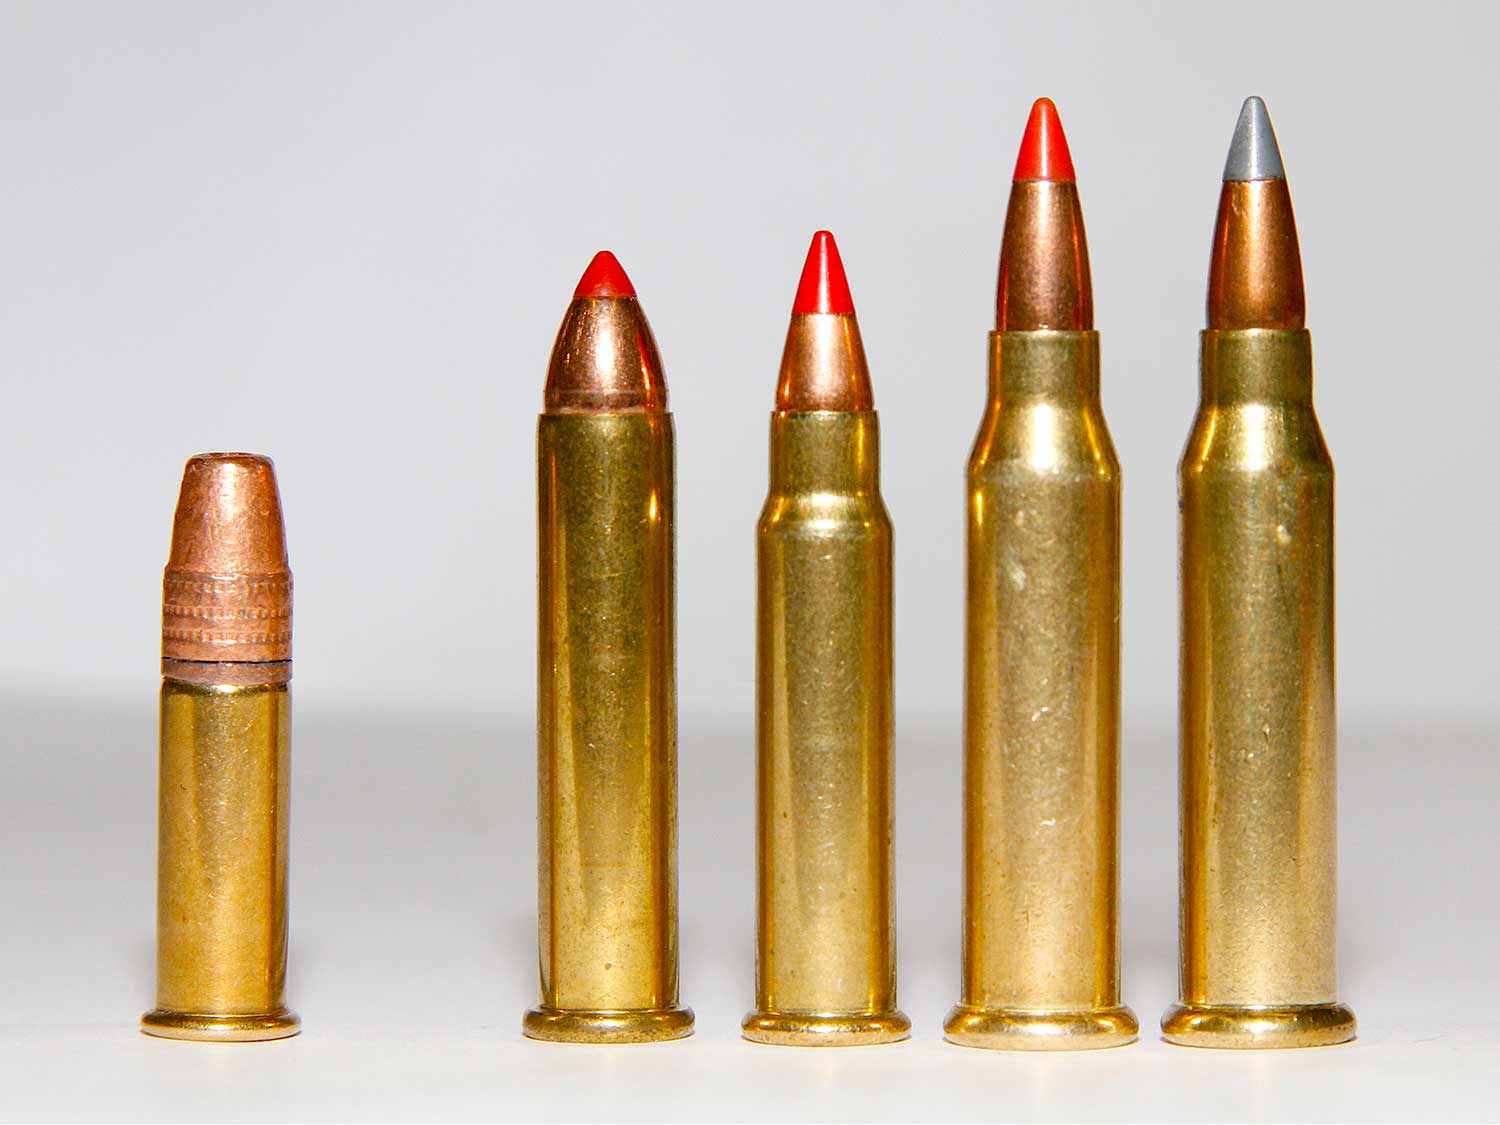 A lineup of .22 and .17 rimfire ammo bullets